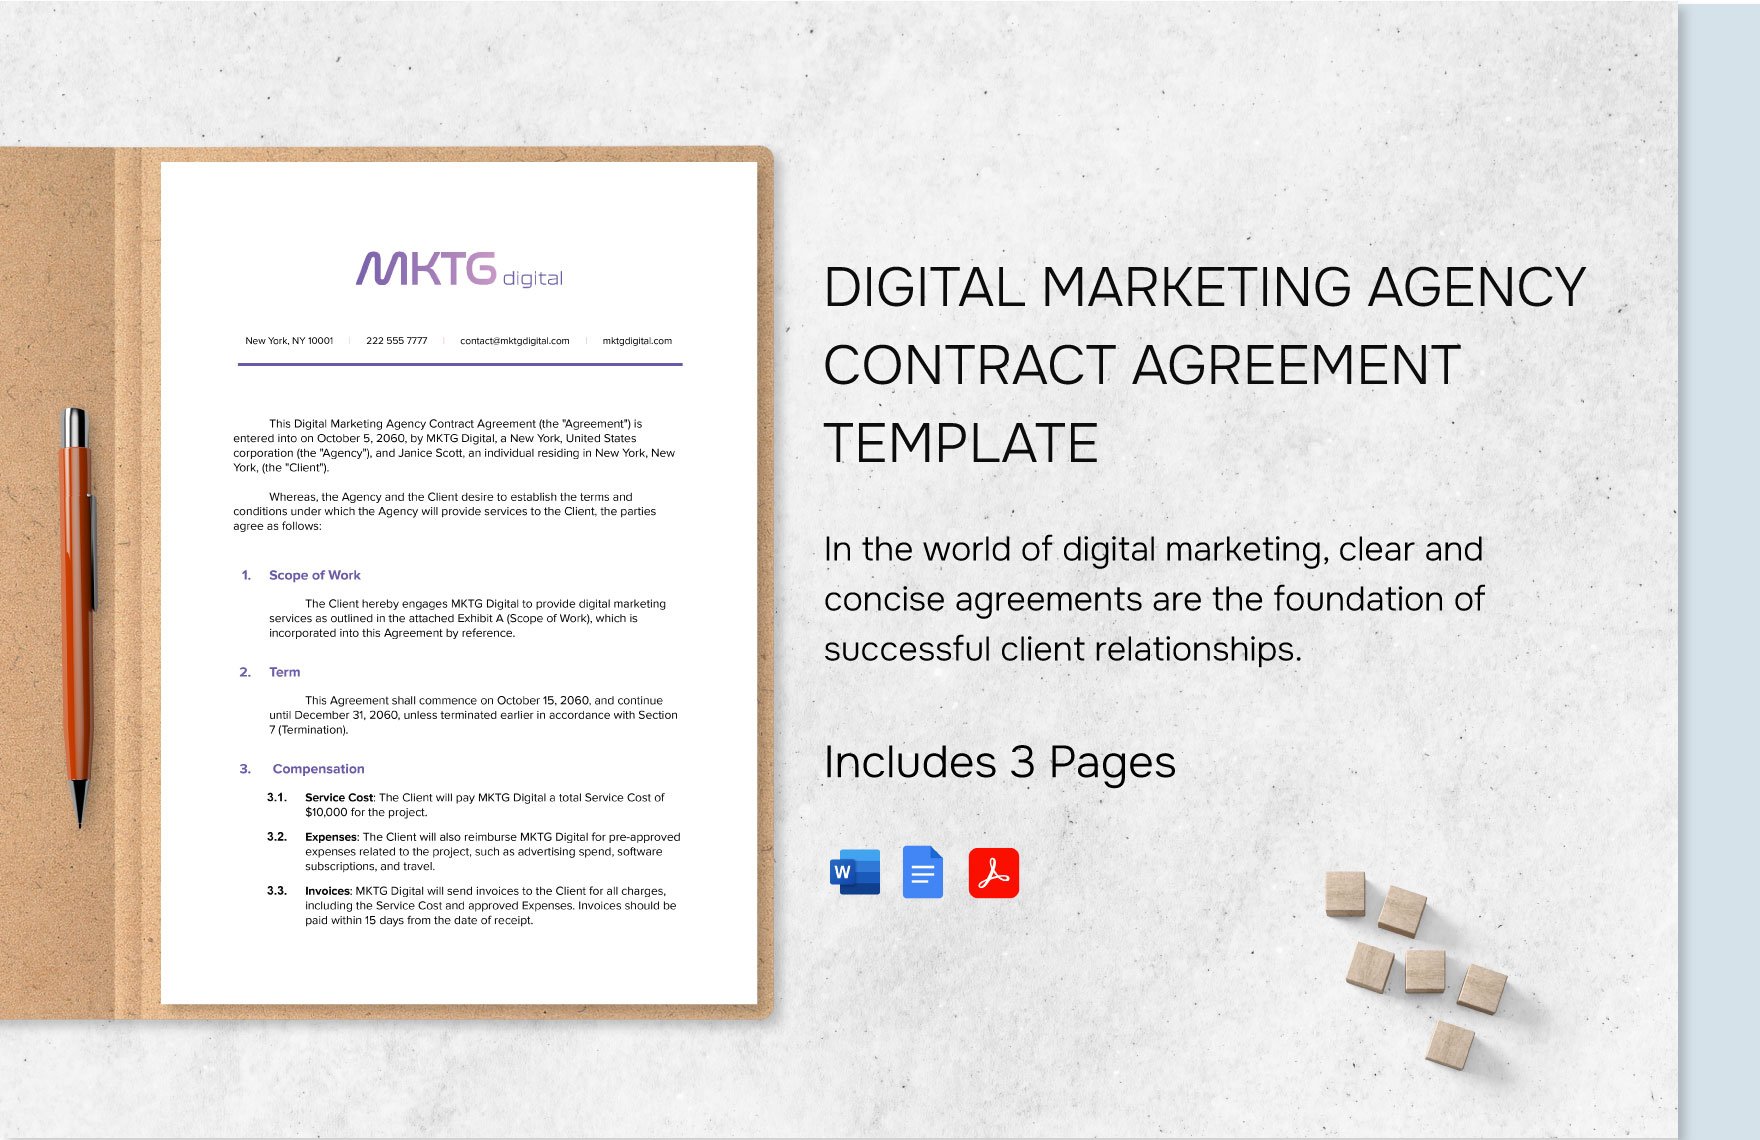 Digital Marketing Agency Contract Agreement Template